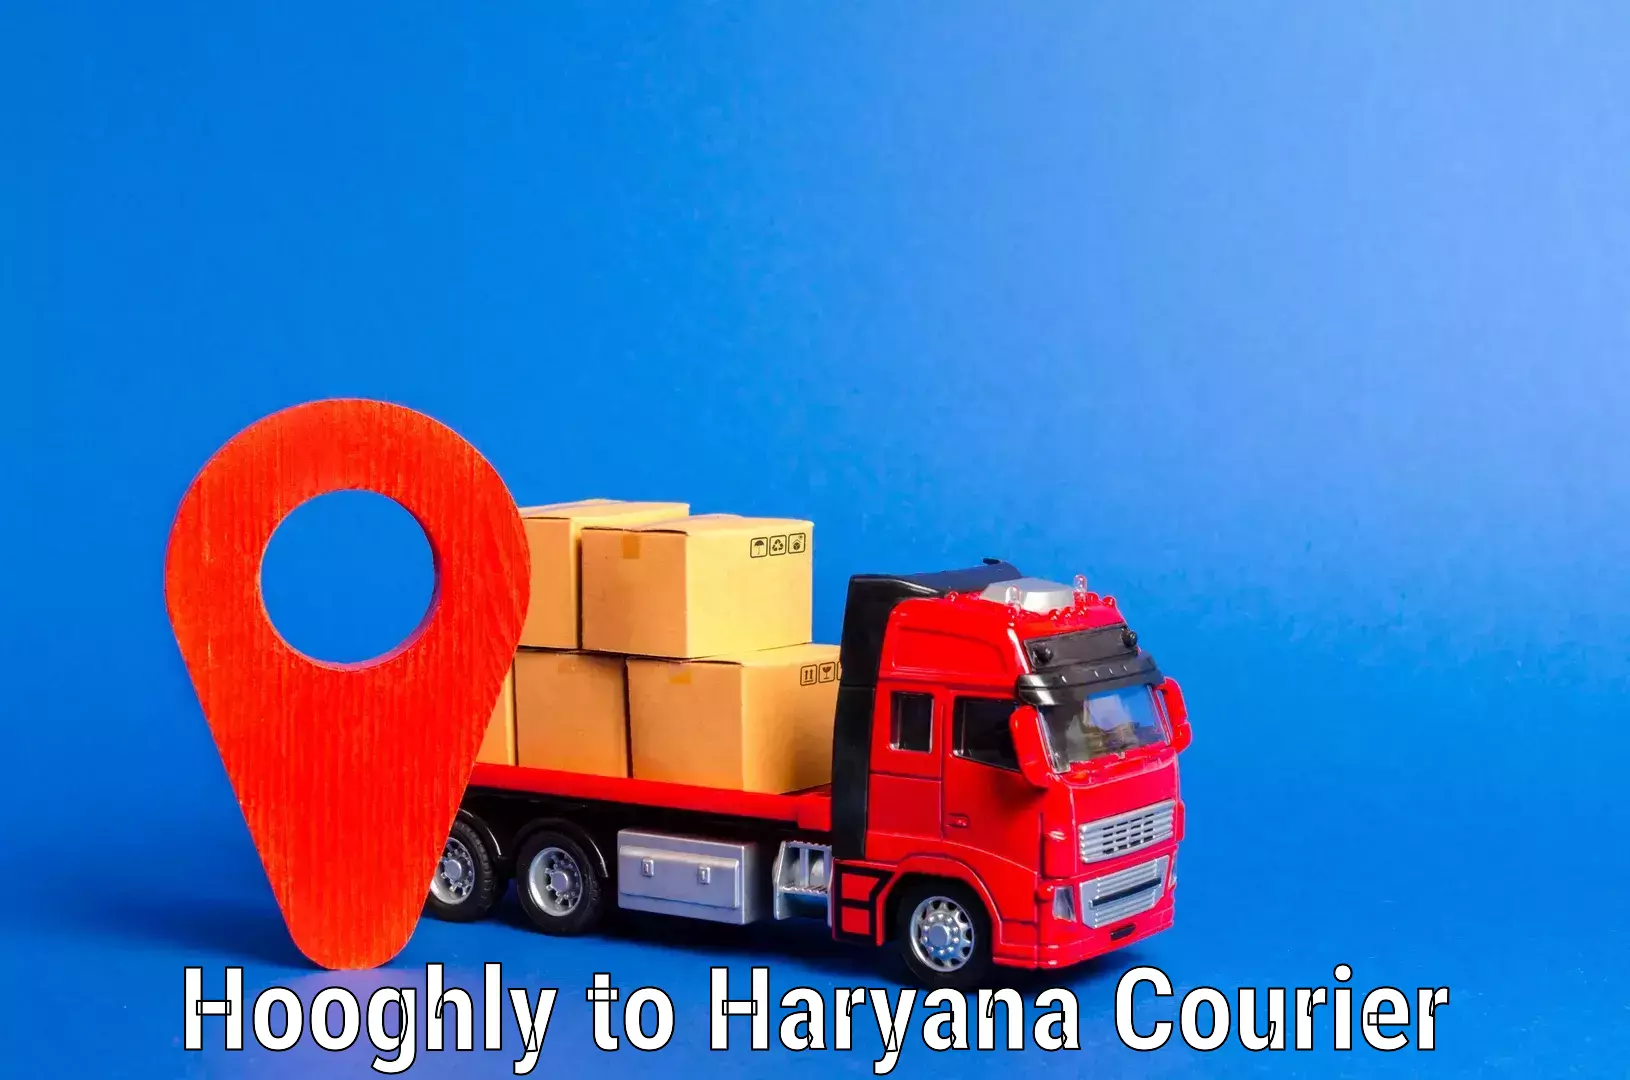 Expert furniture movers Hooghly to Haryana